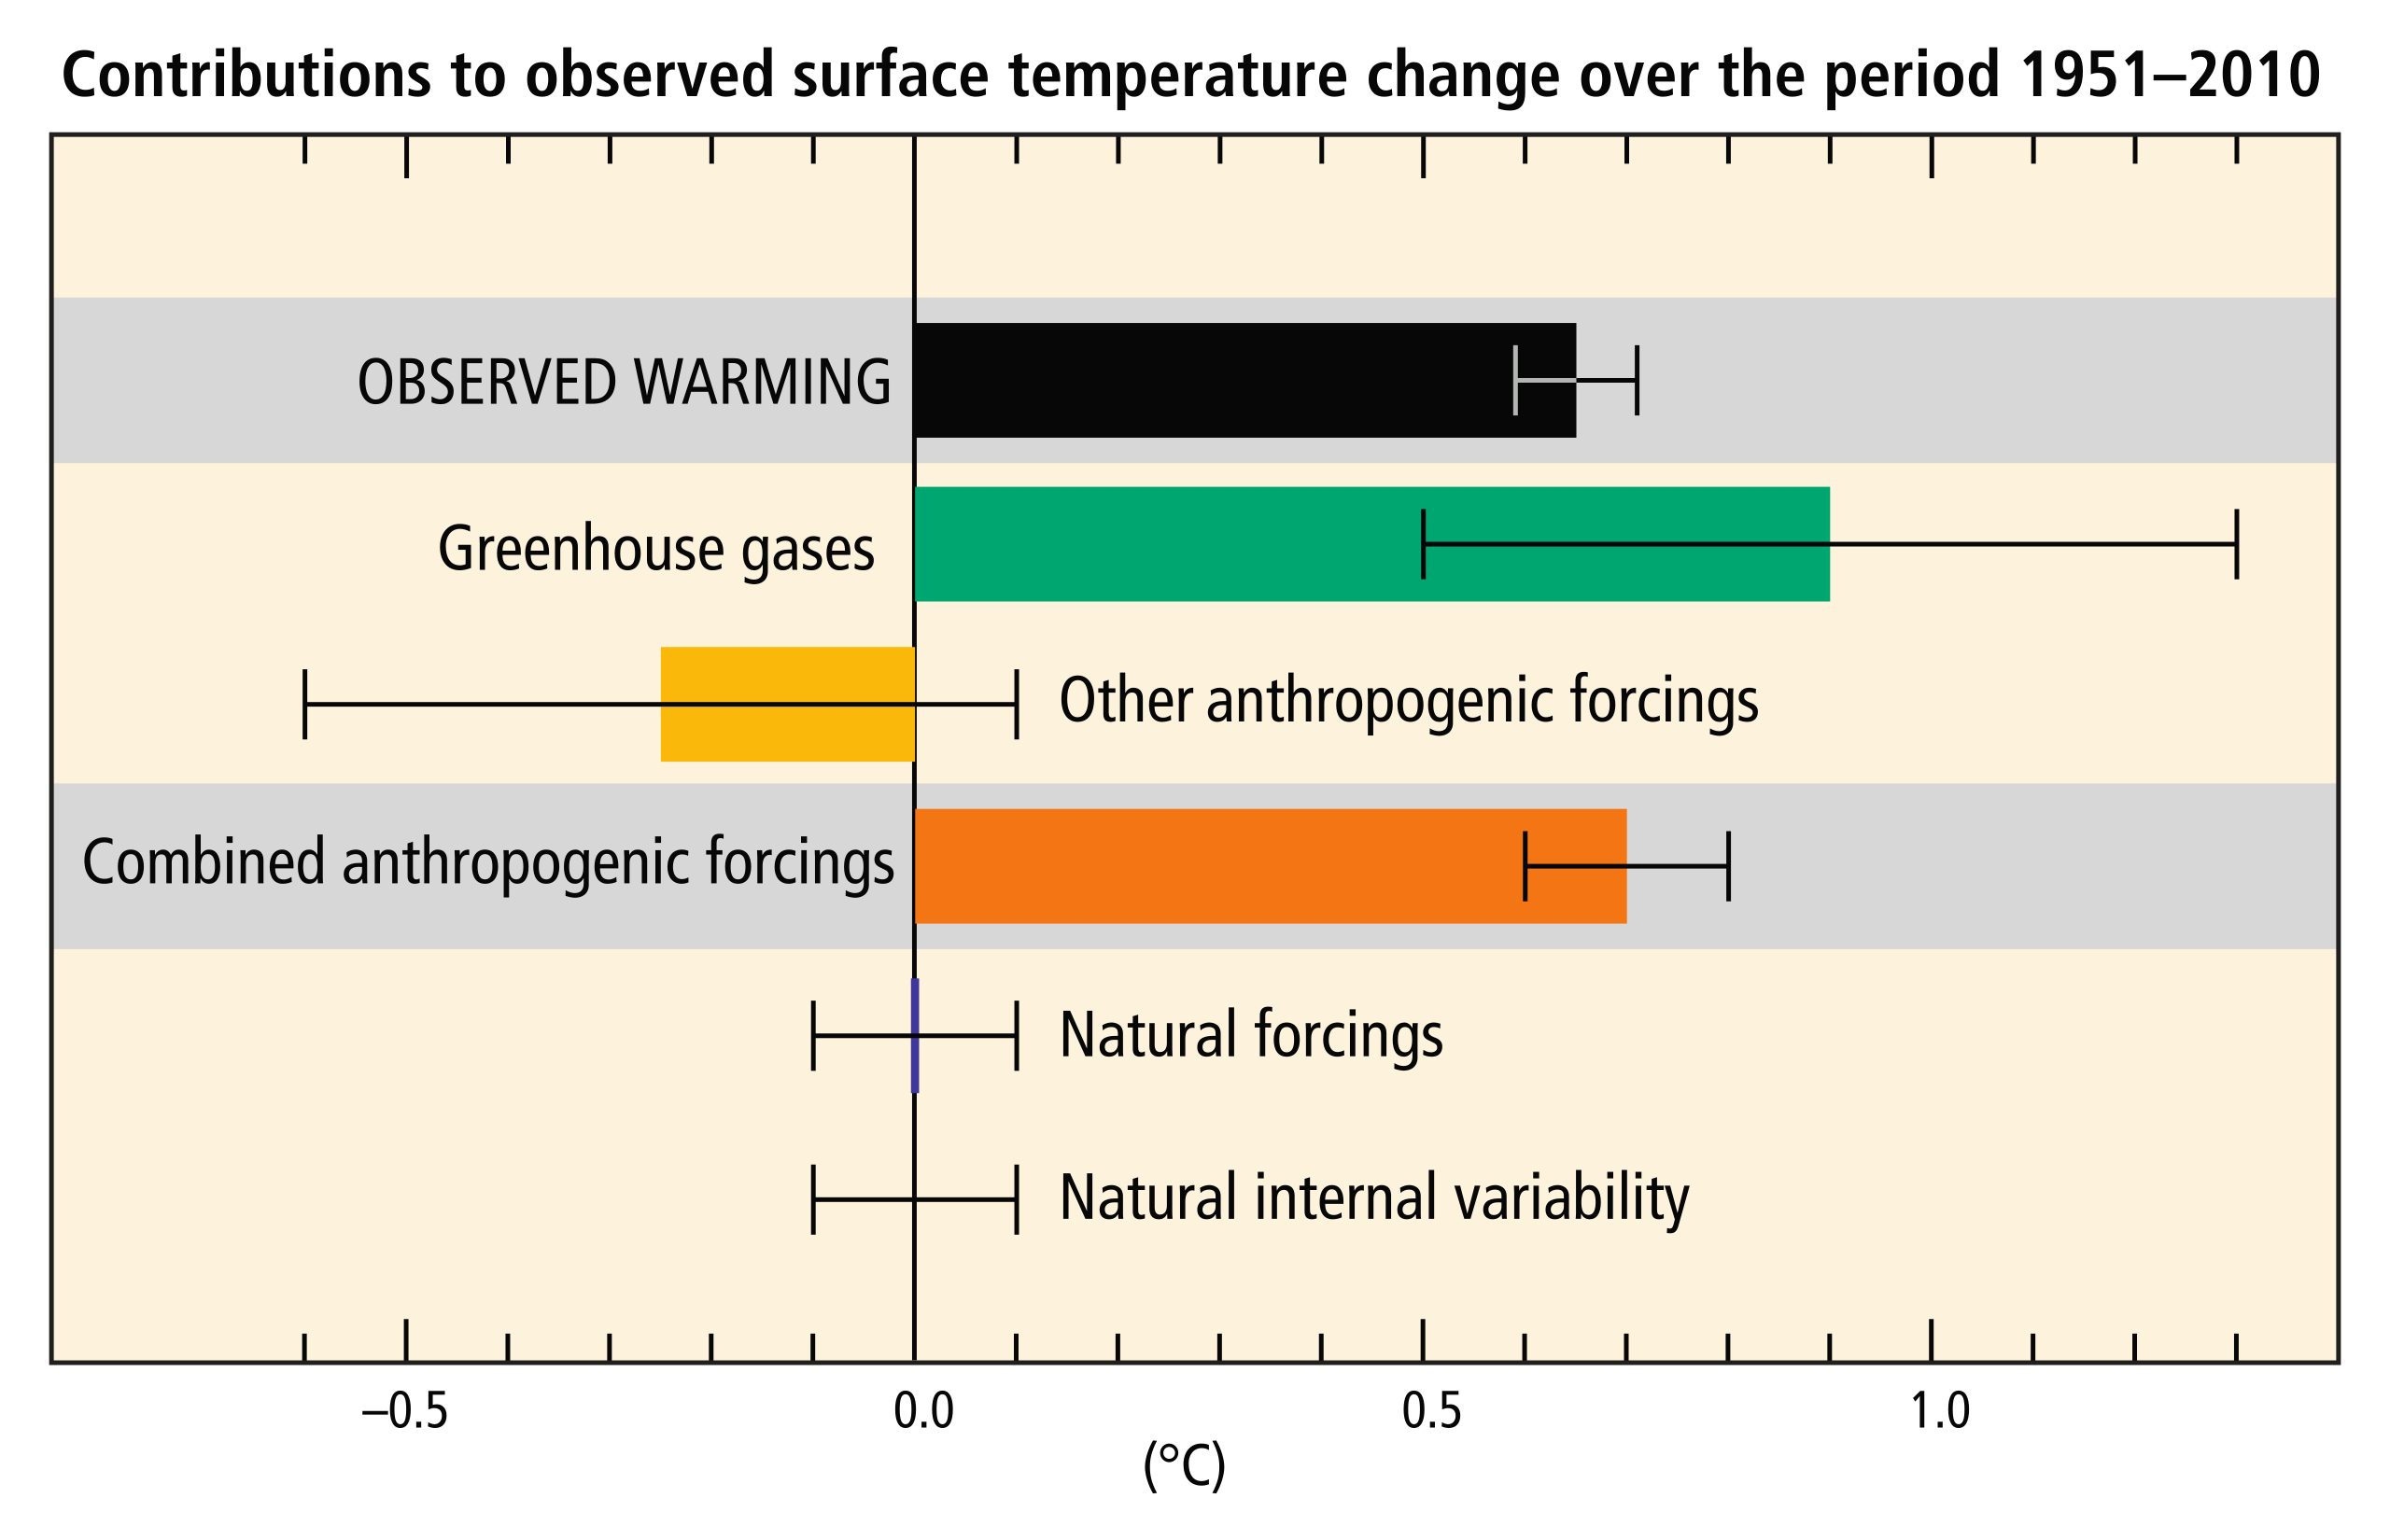 Graph with degrees Celsius along the horizontal axis ranging from negative 0.6 on the left to positive 1.3 degrees Celsius on the right. There are black horizontal lines showing the likely ranges and color-coded bars showing the mid-points for warming trends over the 1951–2010 period from greenhouse gases, other anthropogenic forcings, combined anthropogenic forcings, natural forcings, and natural internal climate variability. The observed surface temperature change is shown as a black bar that goes from 0.0 to 0.66 degrees Celsius. Greenhouse gases are shown as a green bar spanning 0.0 to 0.9 degrees C with a black line from 0.5 to 1.3 degrees C; other anthropogenic forcings are shown as a yellow bar spanning negative 0.28 to 0.0 degrees C with a black line from negative 0.6 to 0.1 degrees C; combined anthropogenic forcings are shown as an orange bar spanning 0.0 to 0.7 degrees C with a black line from 0.6 to 0.8 degrees C; natural forcings are shown as a purple bar spanning negative 0.0 to 0.01 degrees C with a black line from negative 0.1 to 0.1 degrees C; and natural internal variability does not have a bar but has a black line from negative 0.1 to 0.1 degrees C.